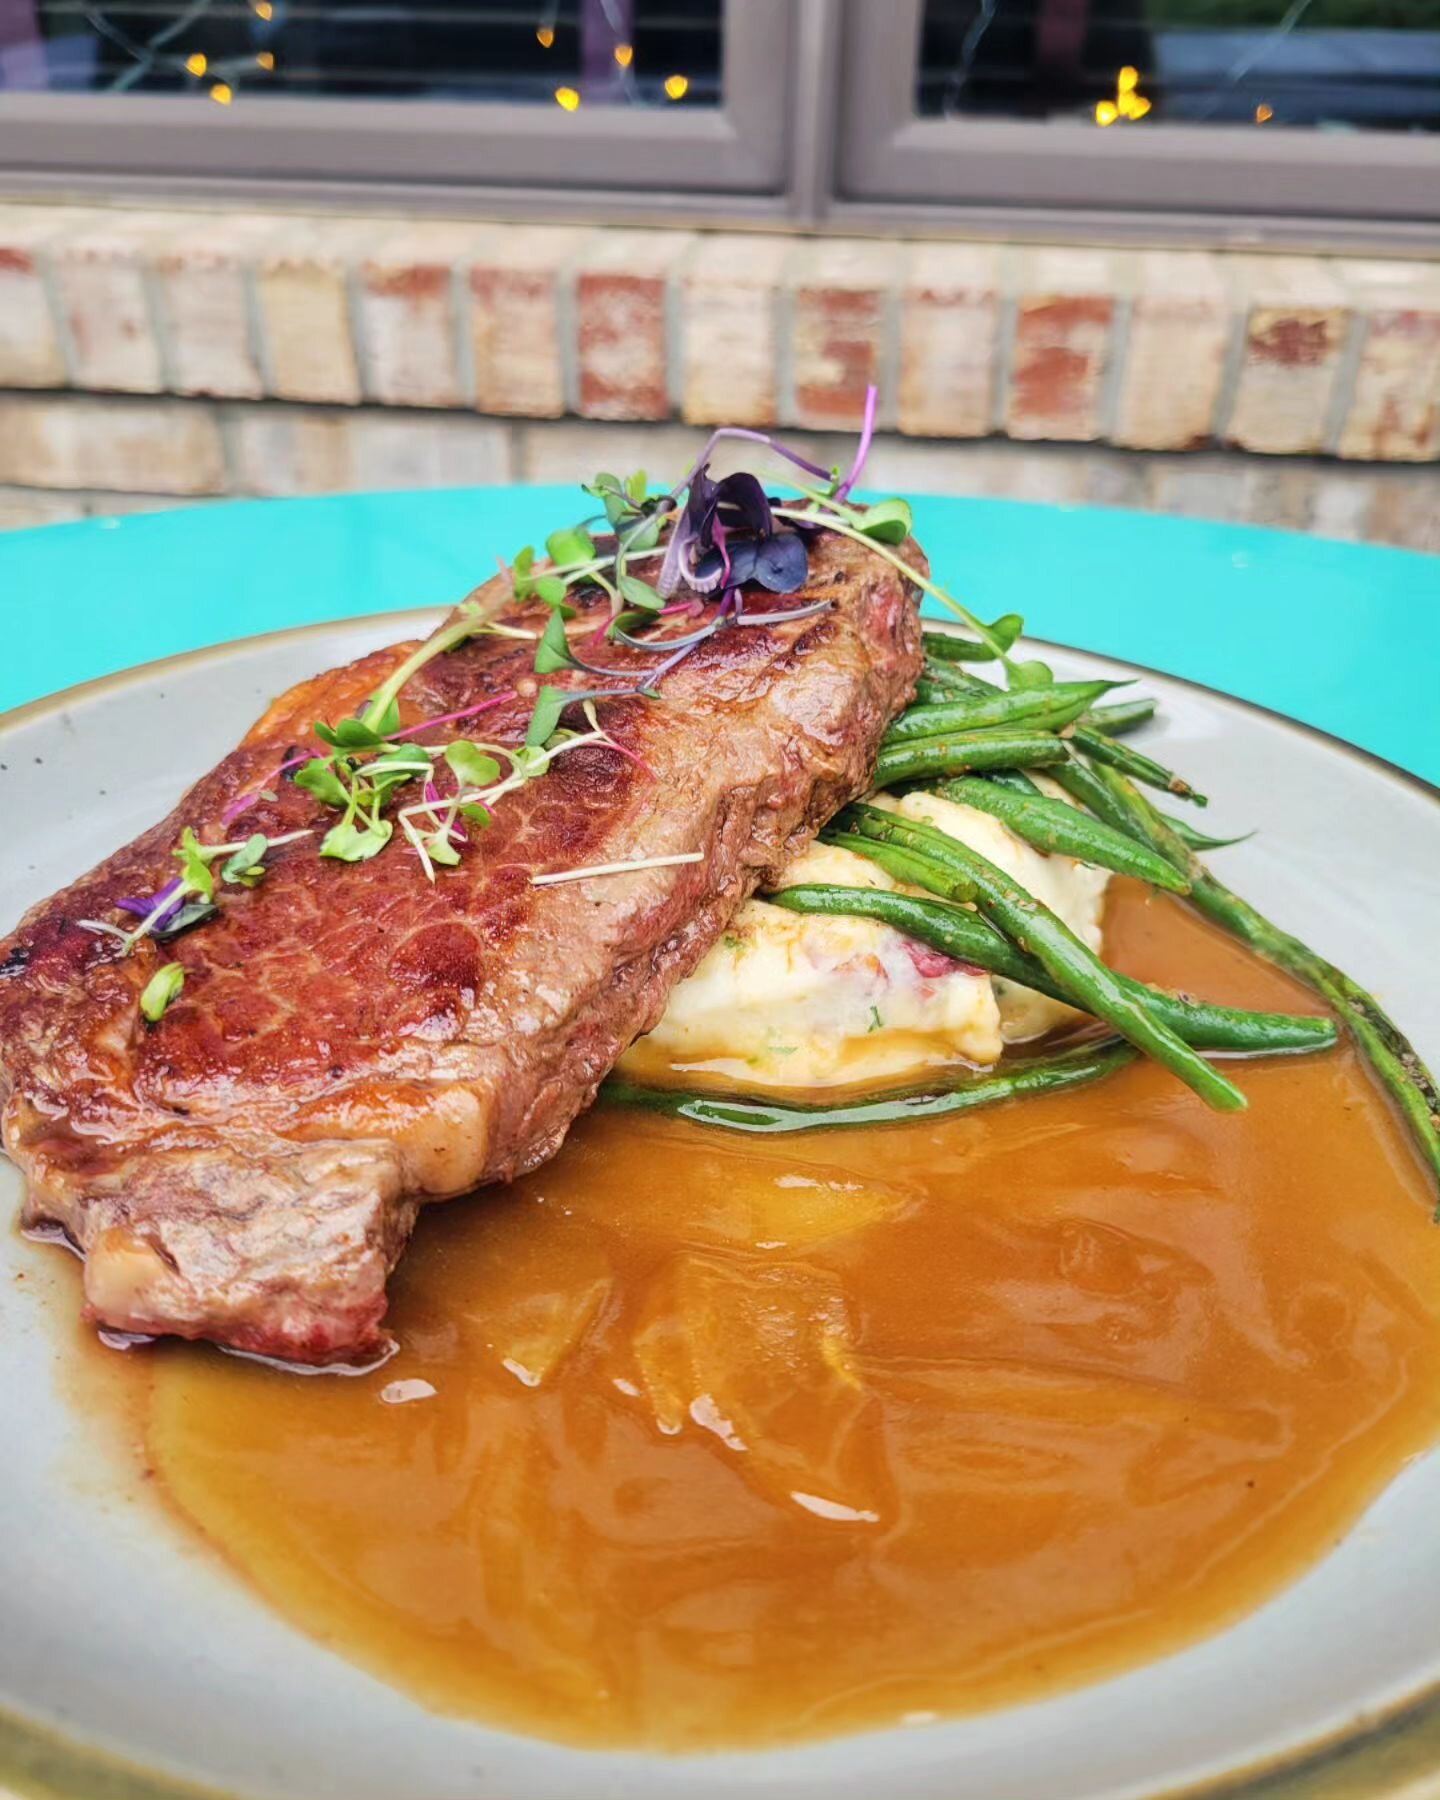 10 oz ribeye, horseradish mash, green beans, &amp; apple demi-glace 

Join us for dinner this weekend to get this special. Reservations can be made online through resy or by phone. Come see us!

#blowingrock #blowingrocknc #supportlocal #828isgreat